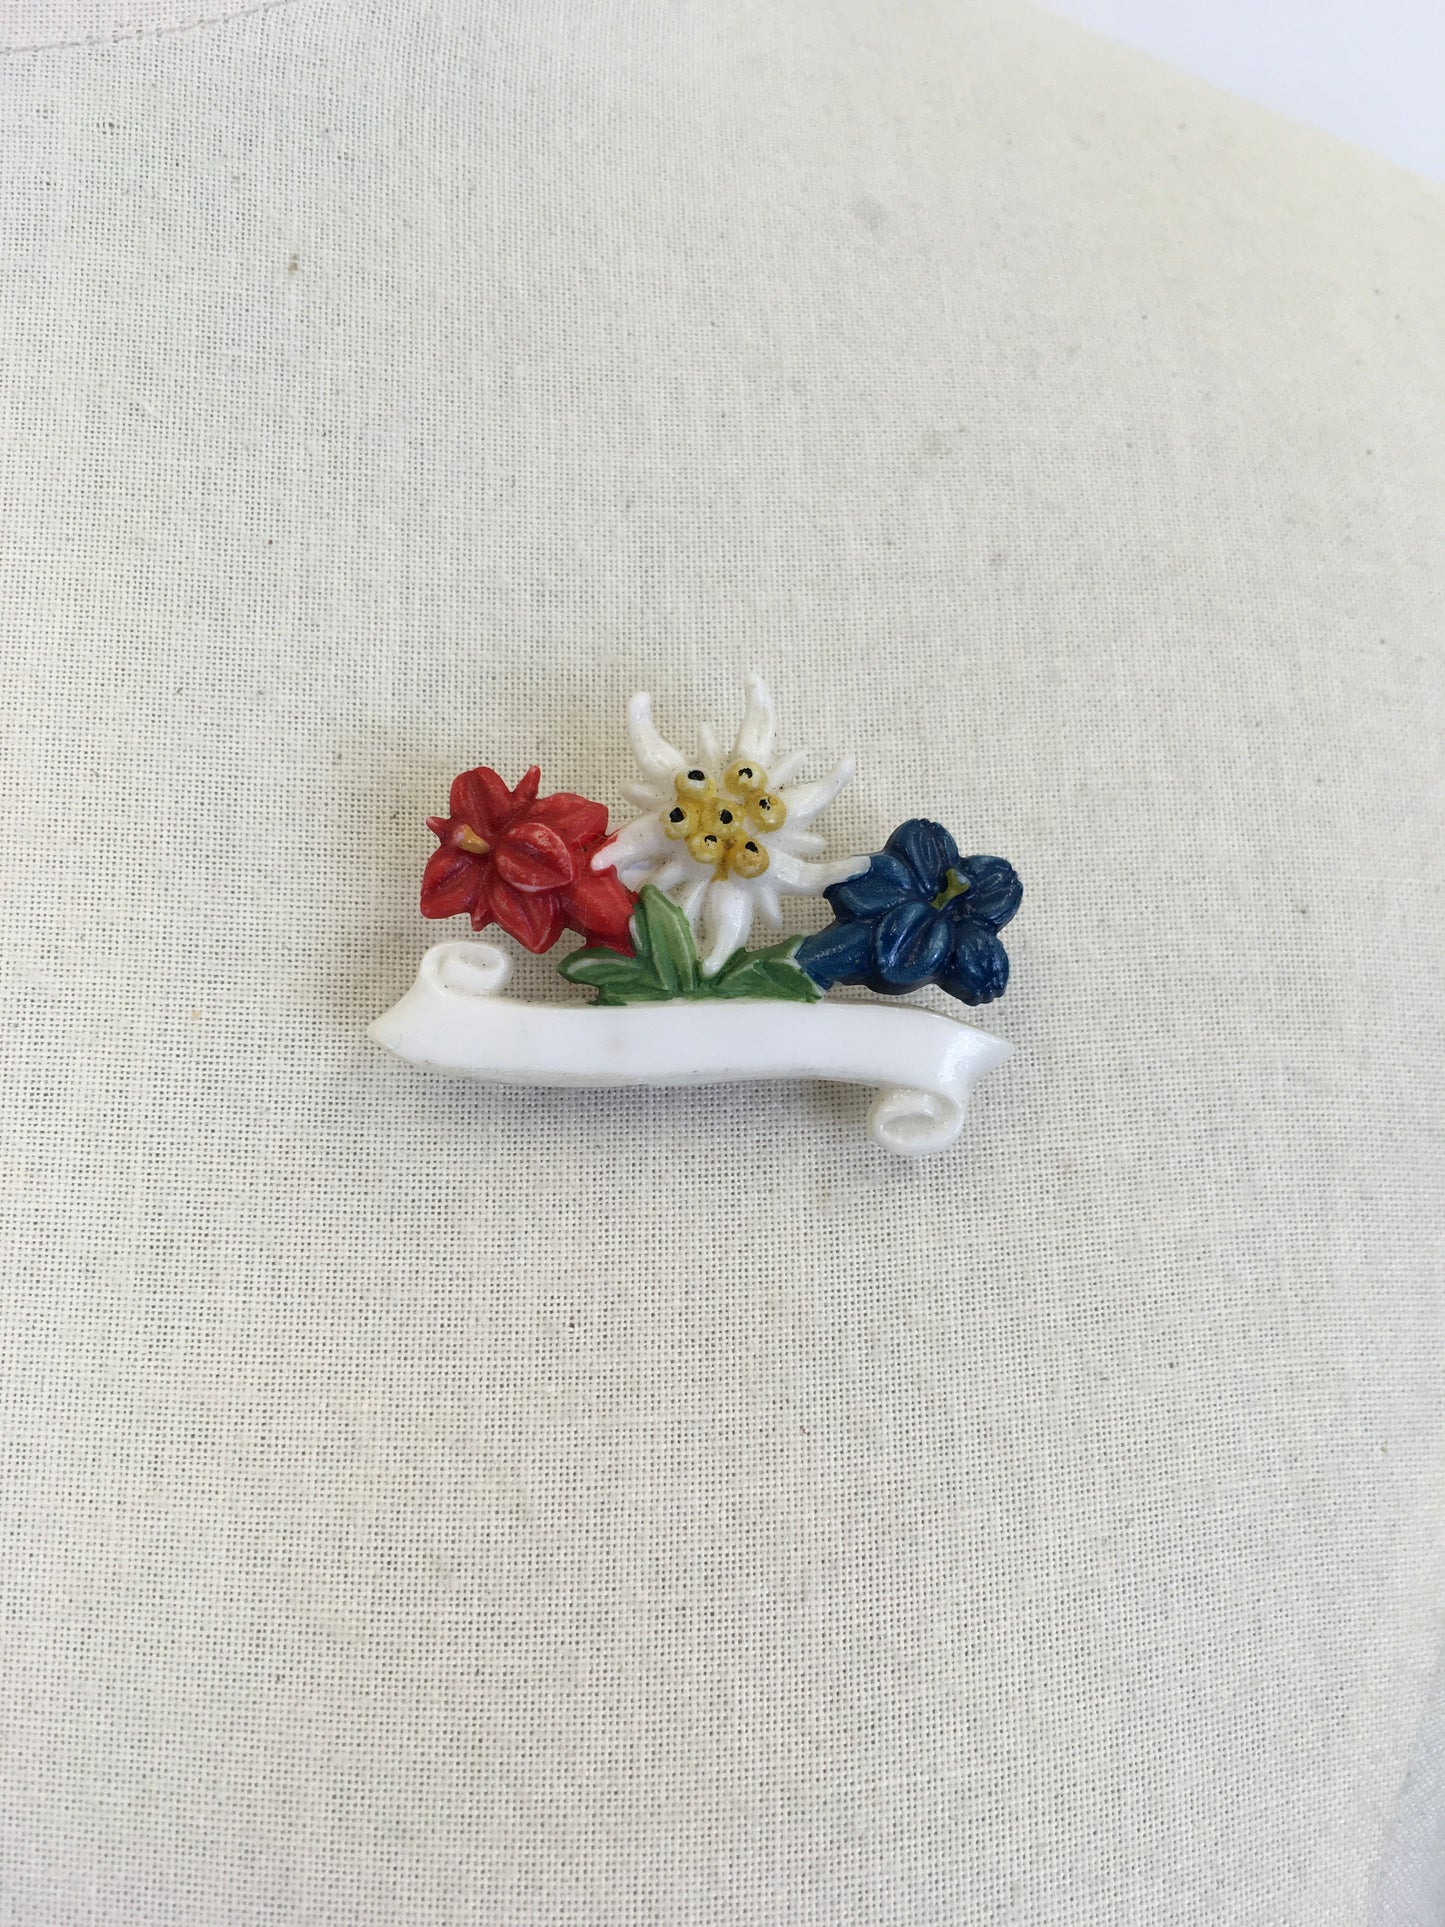 Original 1940’s Early Plastic Floral Brooch - In White, Red, Blue, Yellow & Green